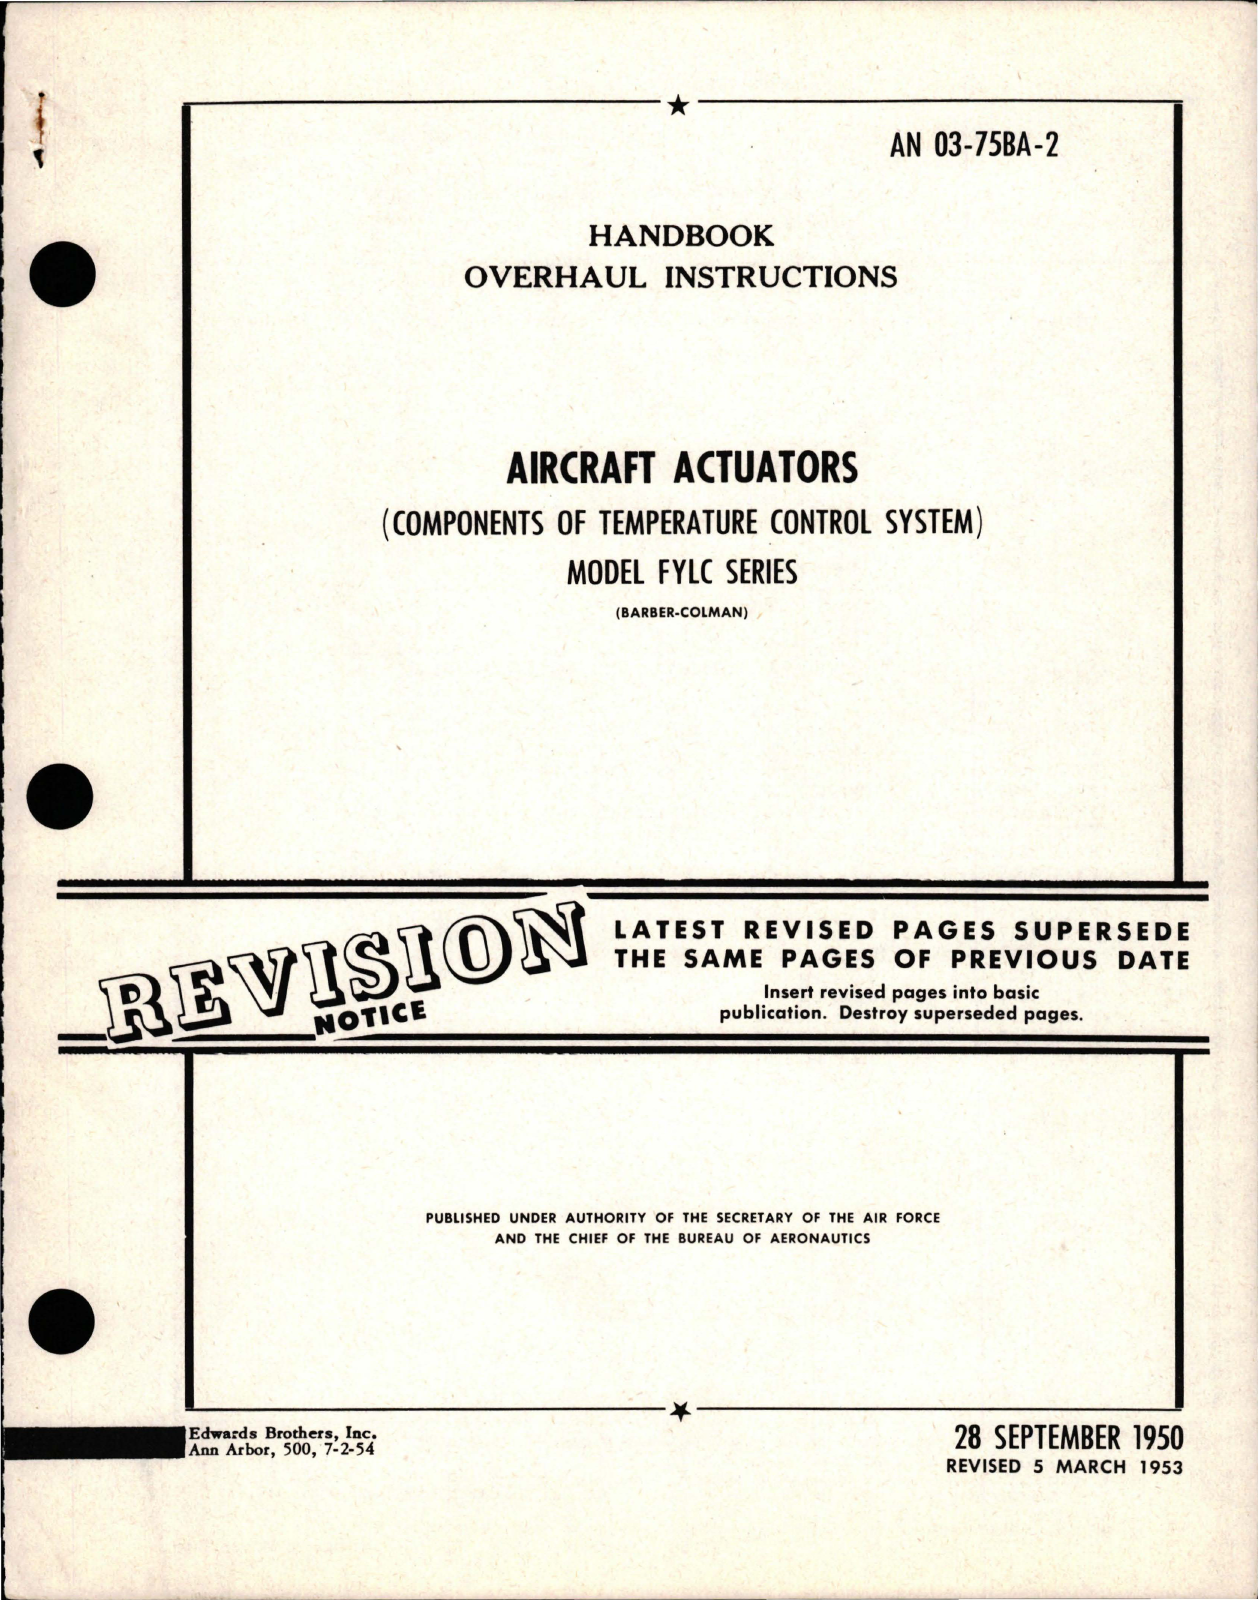 Sample page 1 from AirCorps Library document: Overhaul Instructions for Aircraft Actuators - Model FYLC Series 